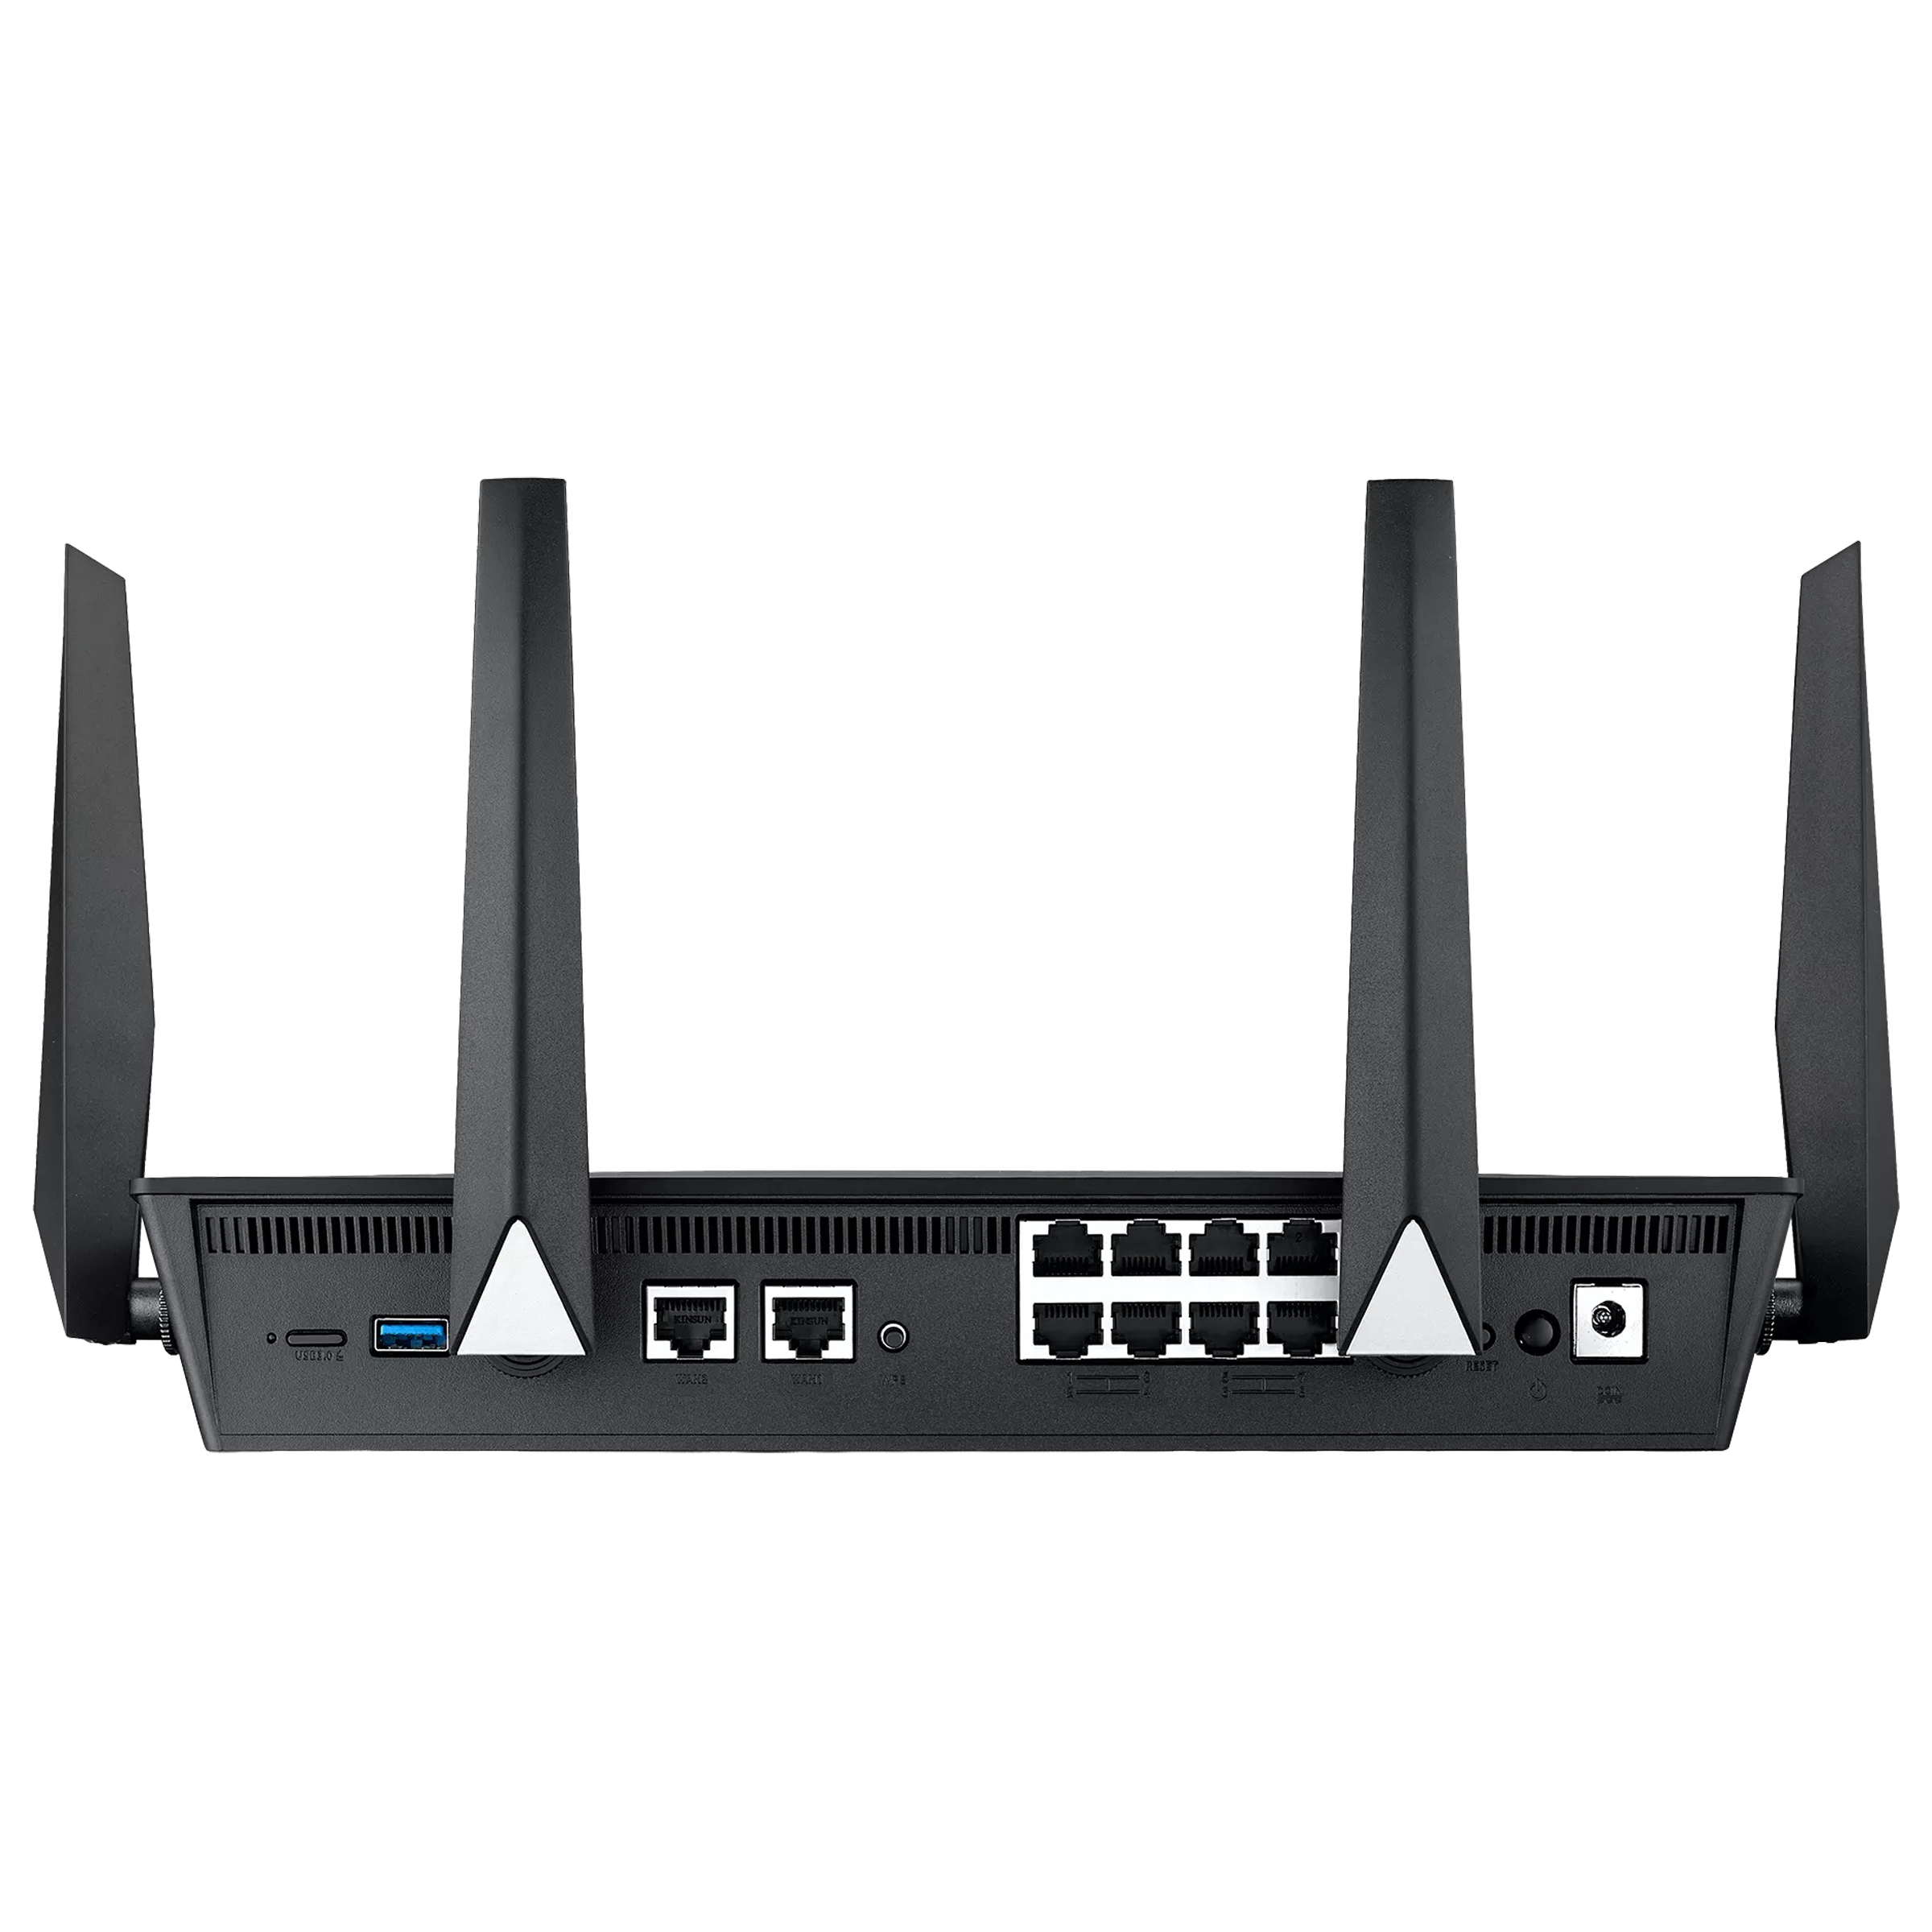 Asus BRT-AC828 Dual Band 2 Gbps Wi-Fi Router (4 Antennas, 8 LAN Ports, AiProtection Pro, Black)_3